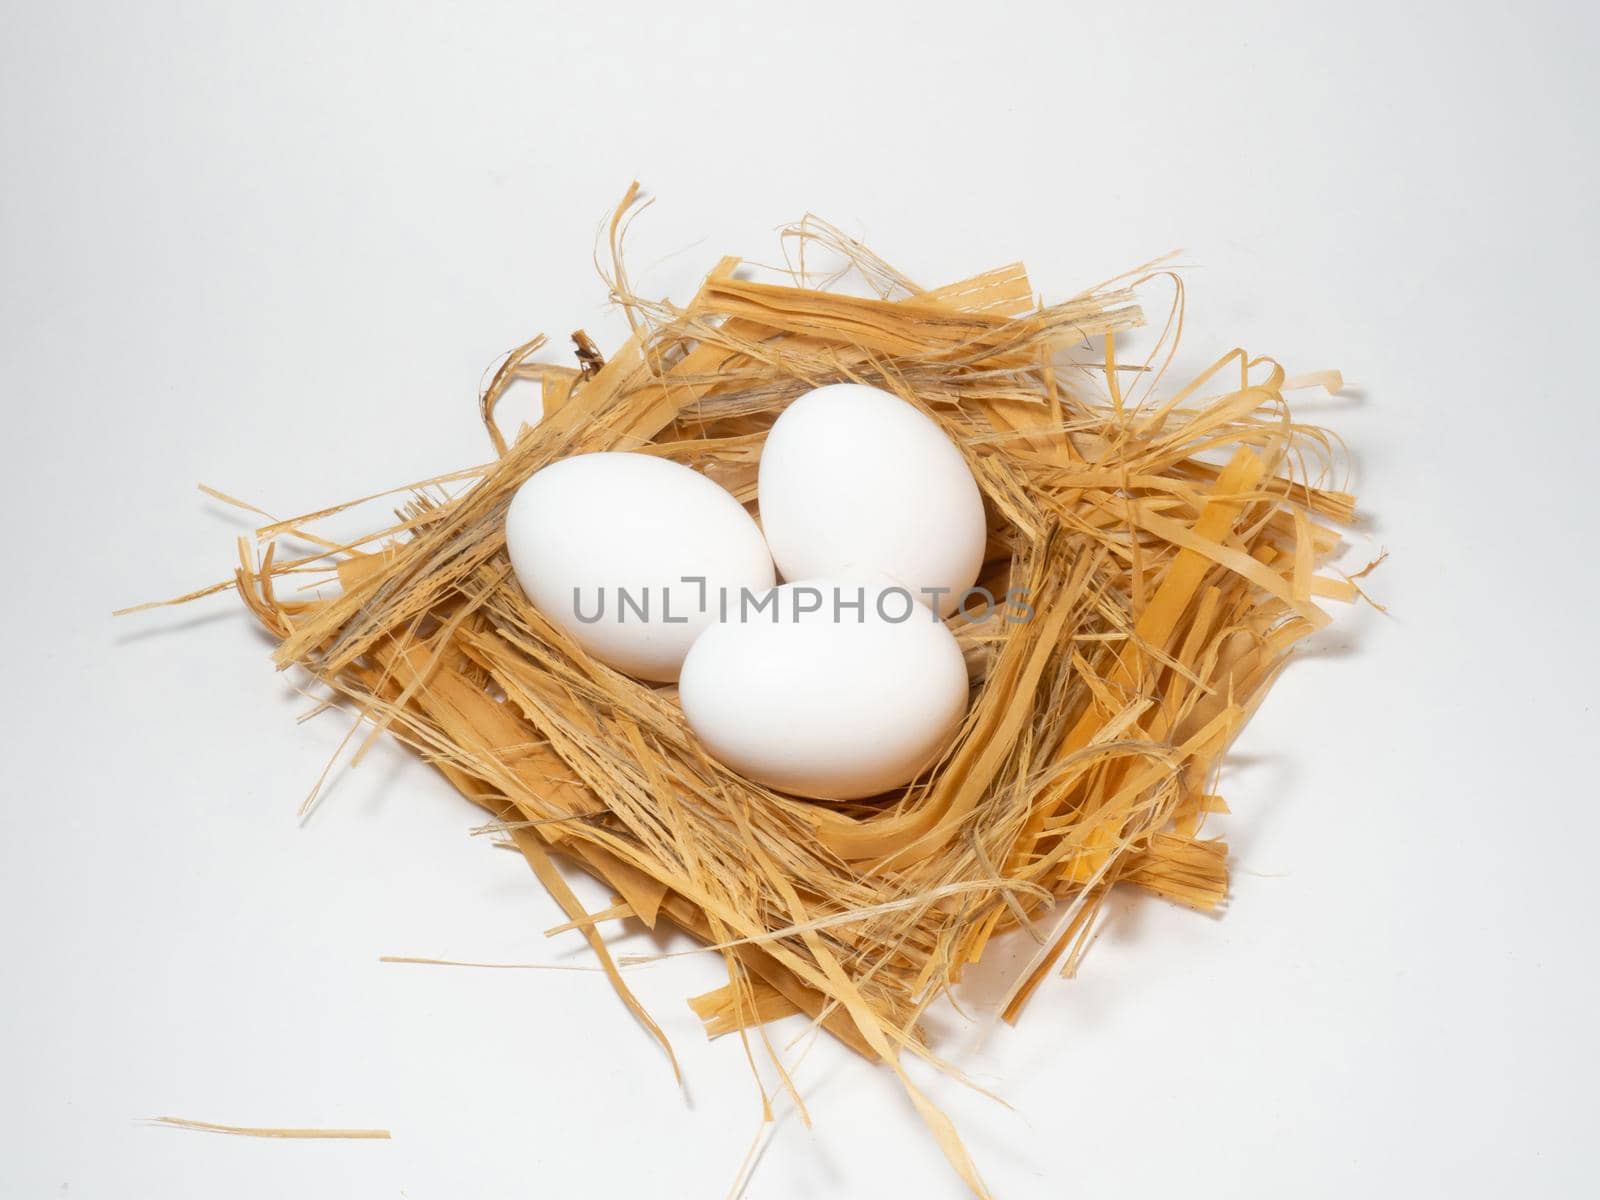 A chicken egg lies in the straw. Three eggs by Puludi